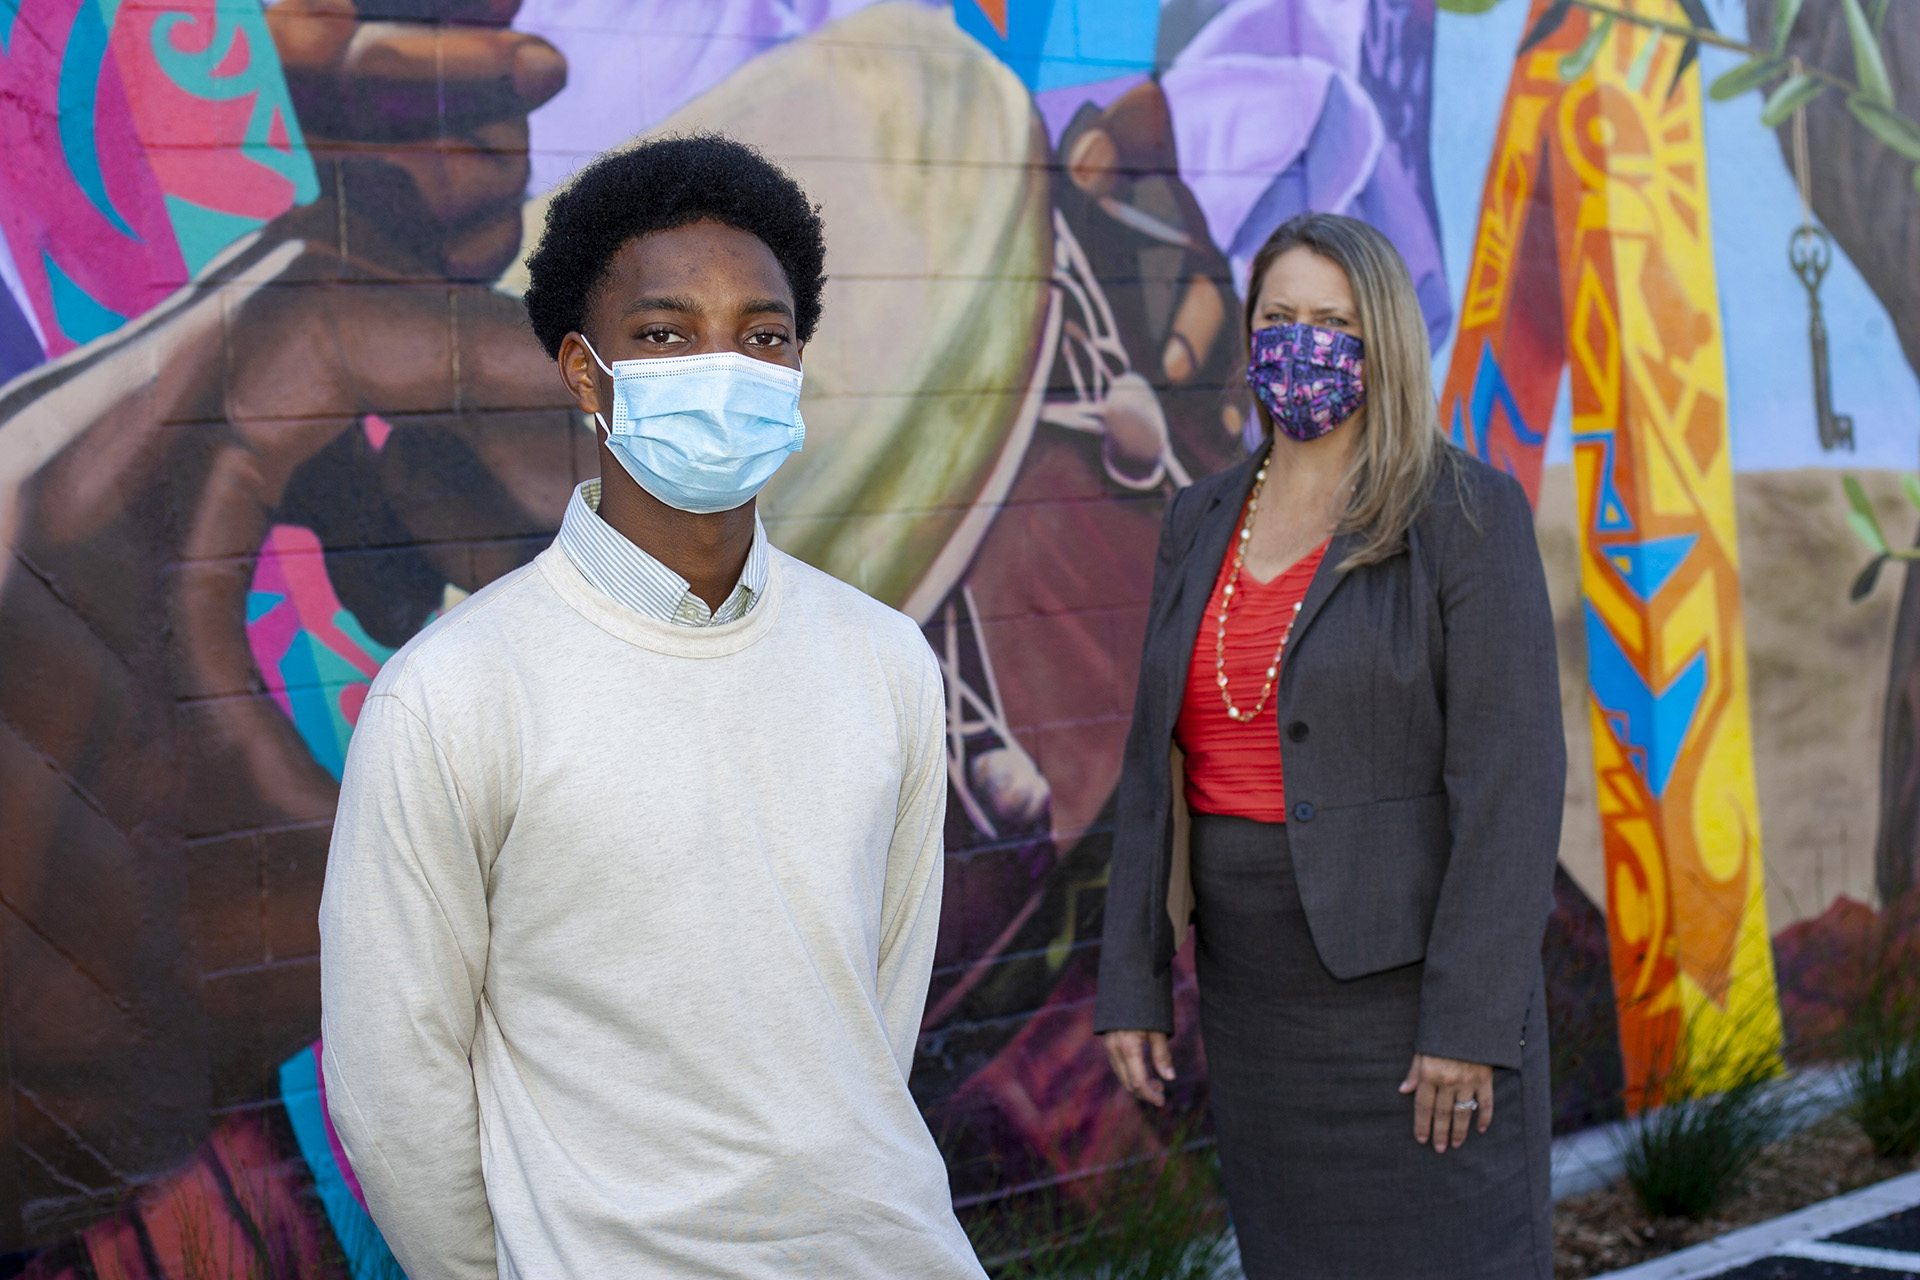 Kaiser Permanente college intern Joshua Atkins, 23, at left with his mentor, Ronelle Scardina in Berkeley.